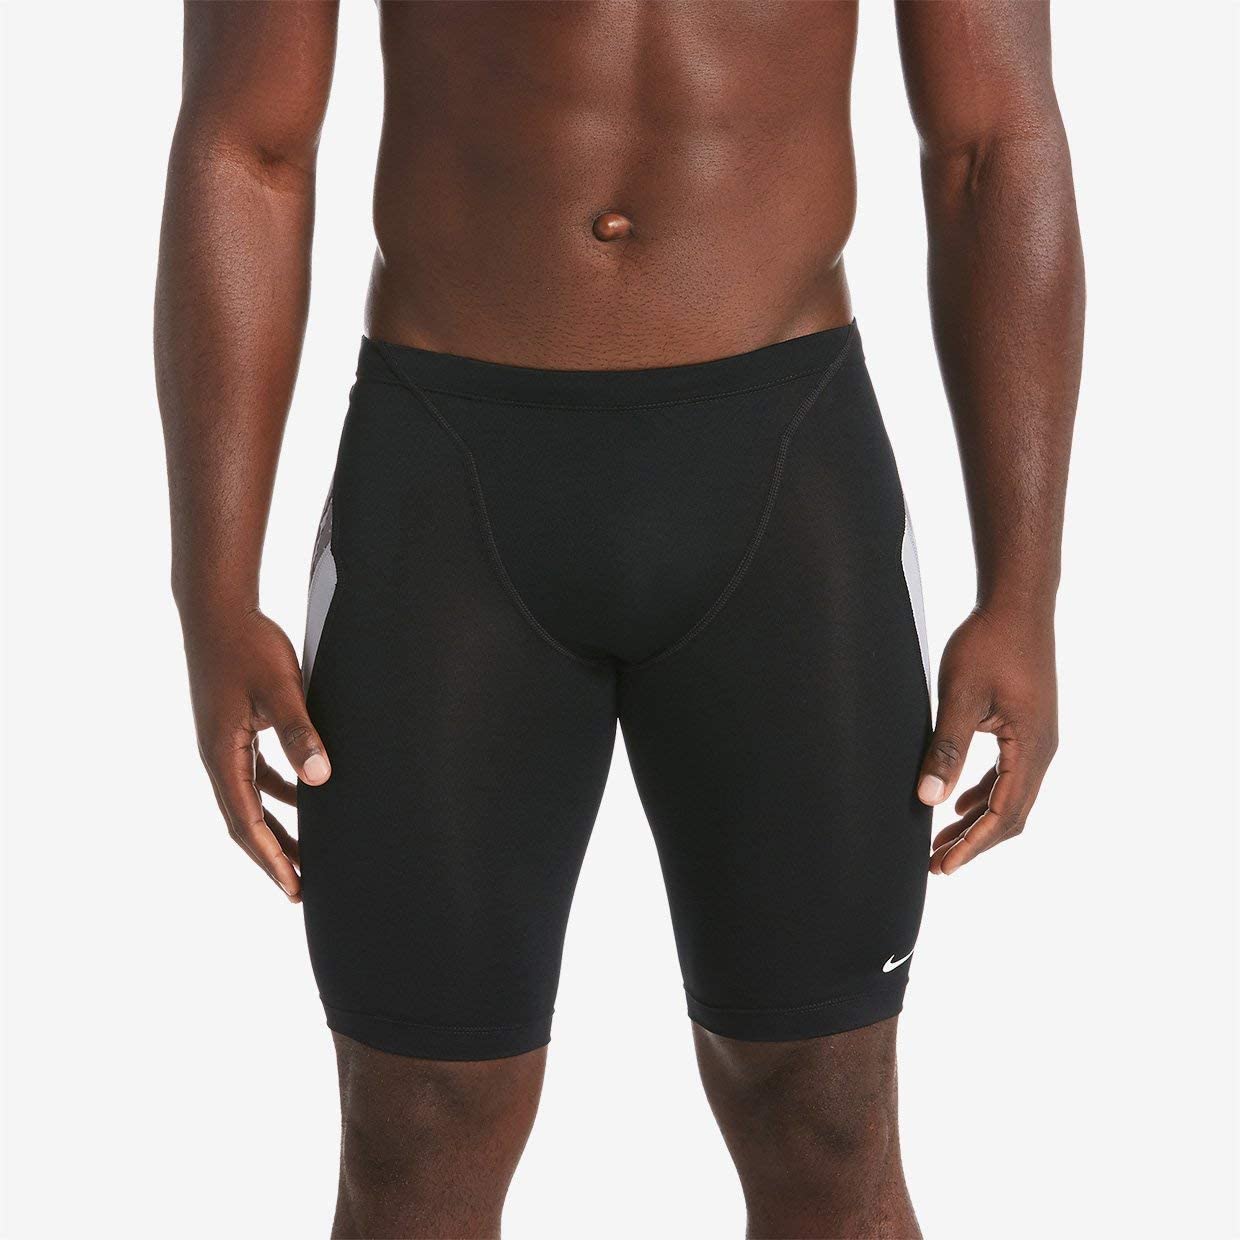 Nike Swim Men's Jammer in Black color from the front